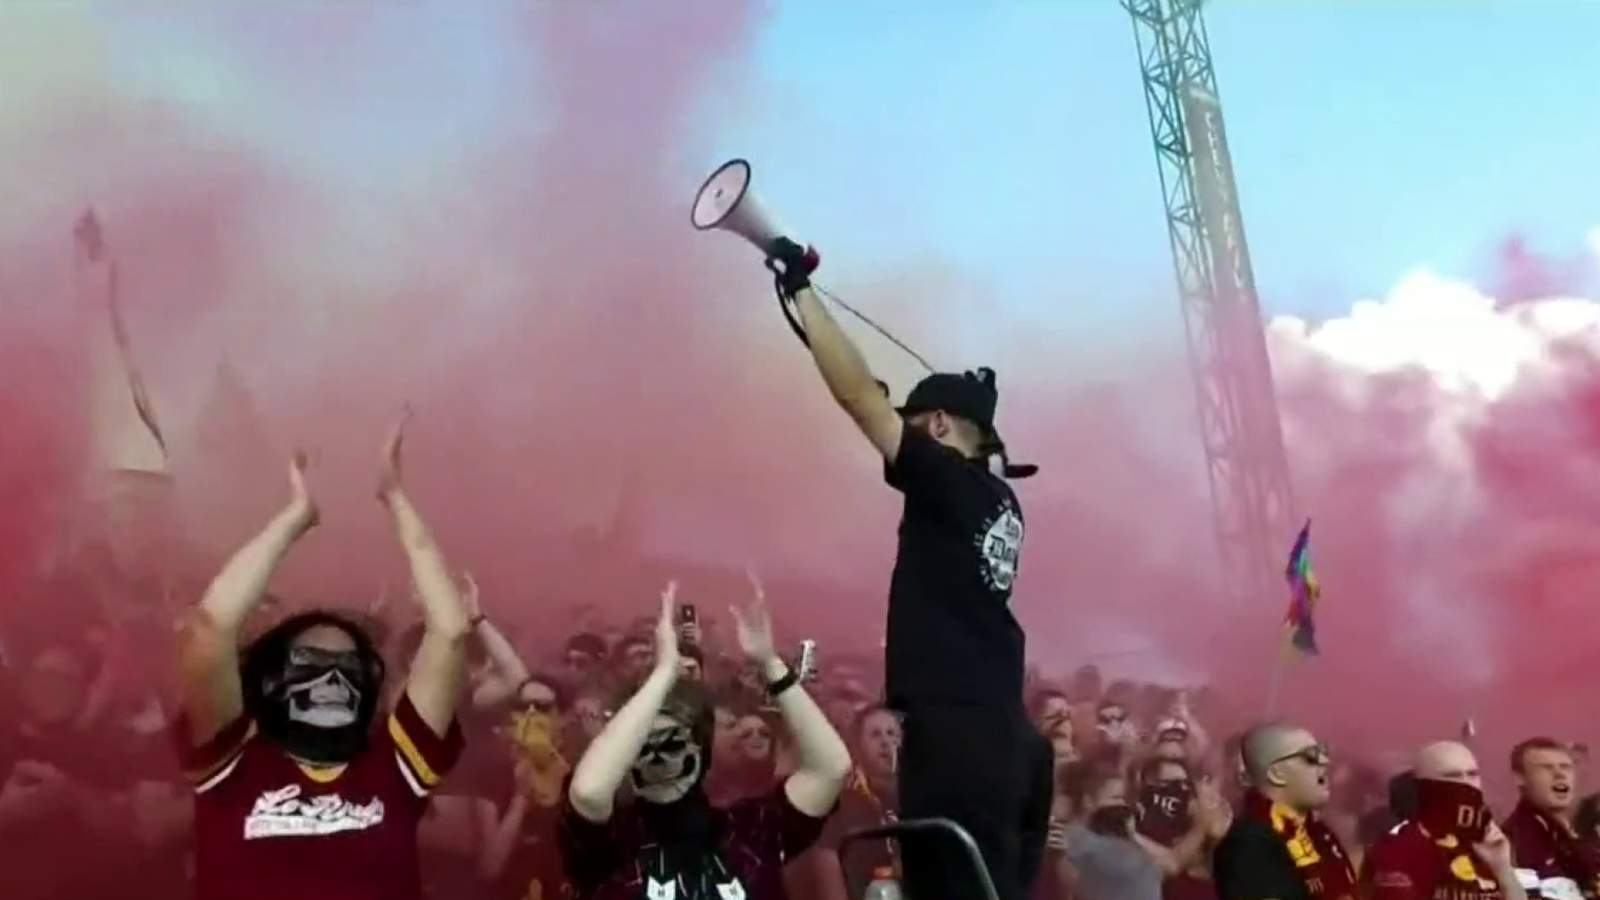 Detroit City FC supporters can become partial owners, have invested more than $1 million so far